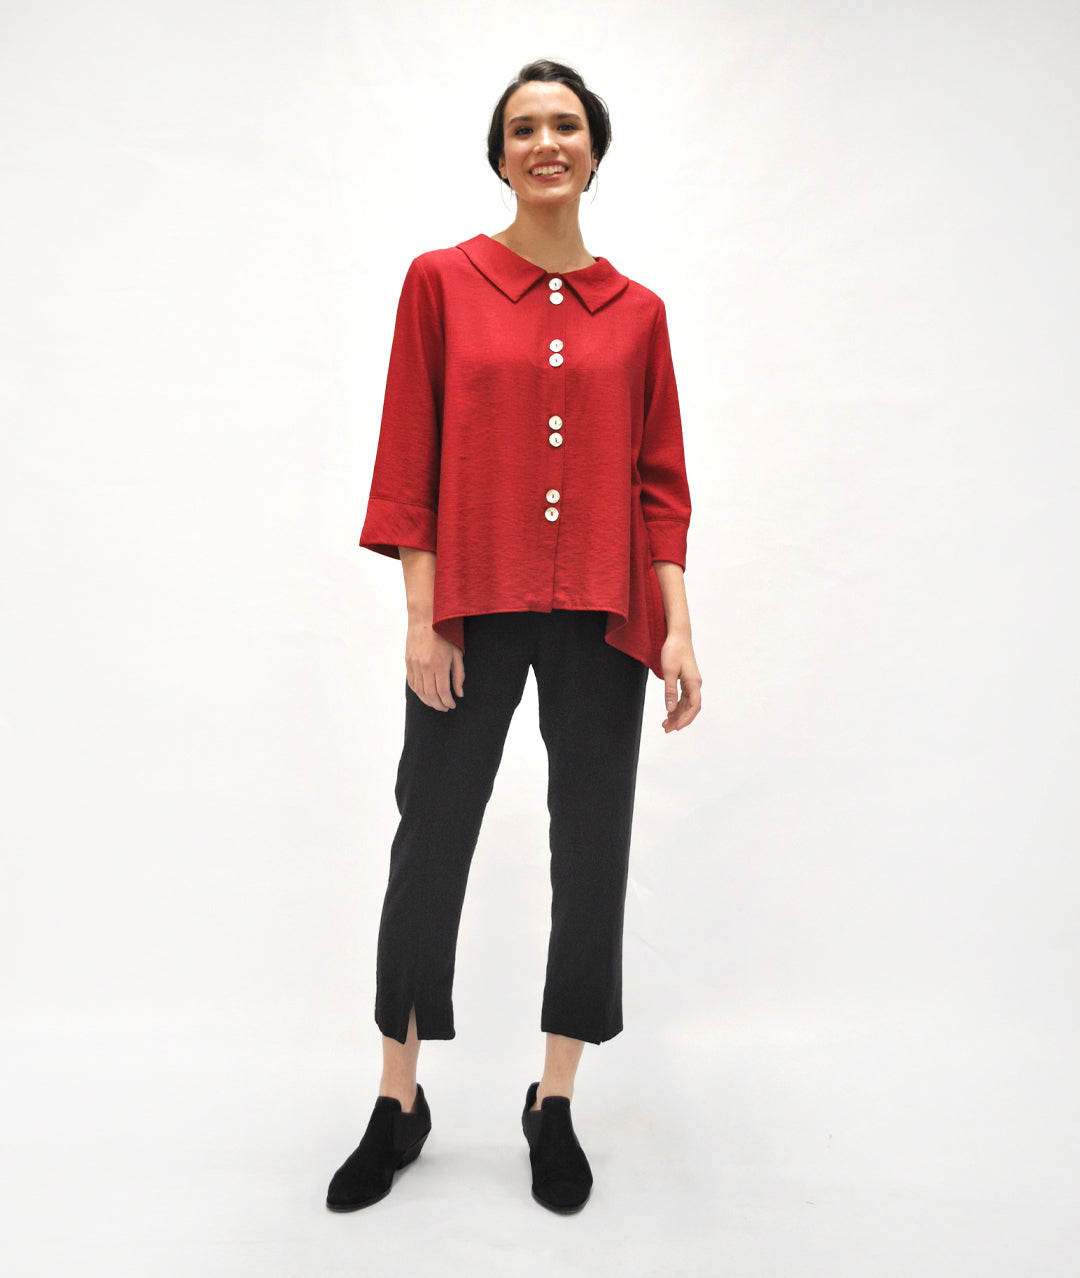 model in a slim black pant with a button up cranberry red blouse